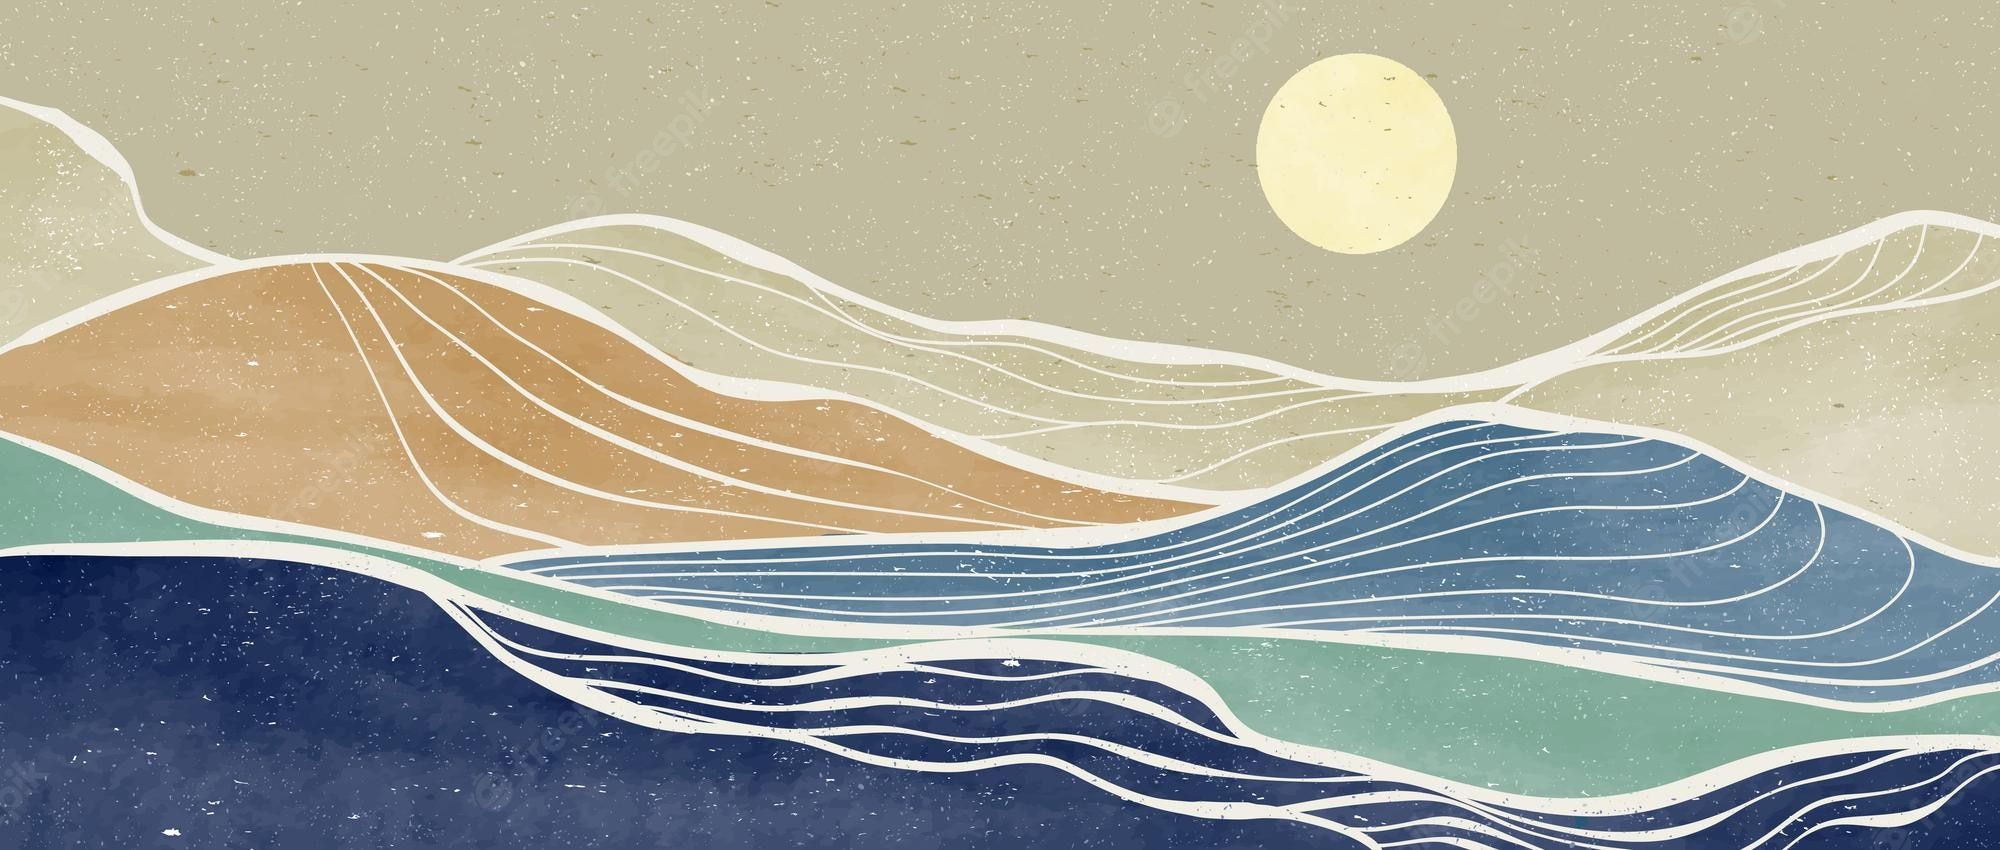 A minimalist abstract illustration of a landscape with a mountain range and a full moon - Wave, art